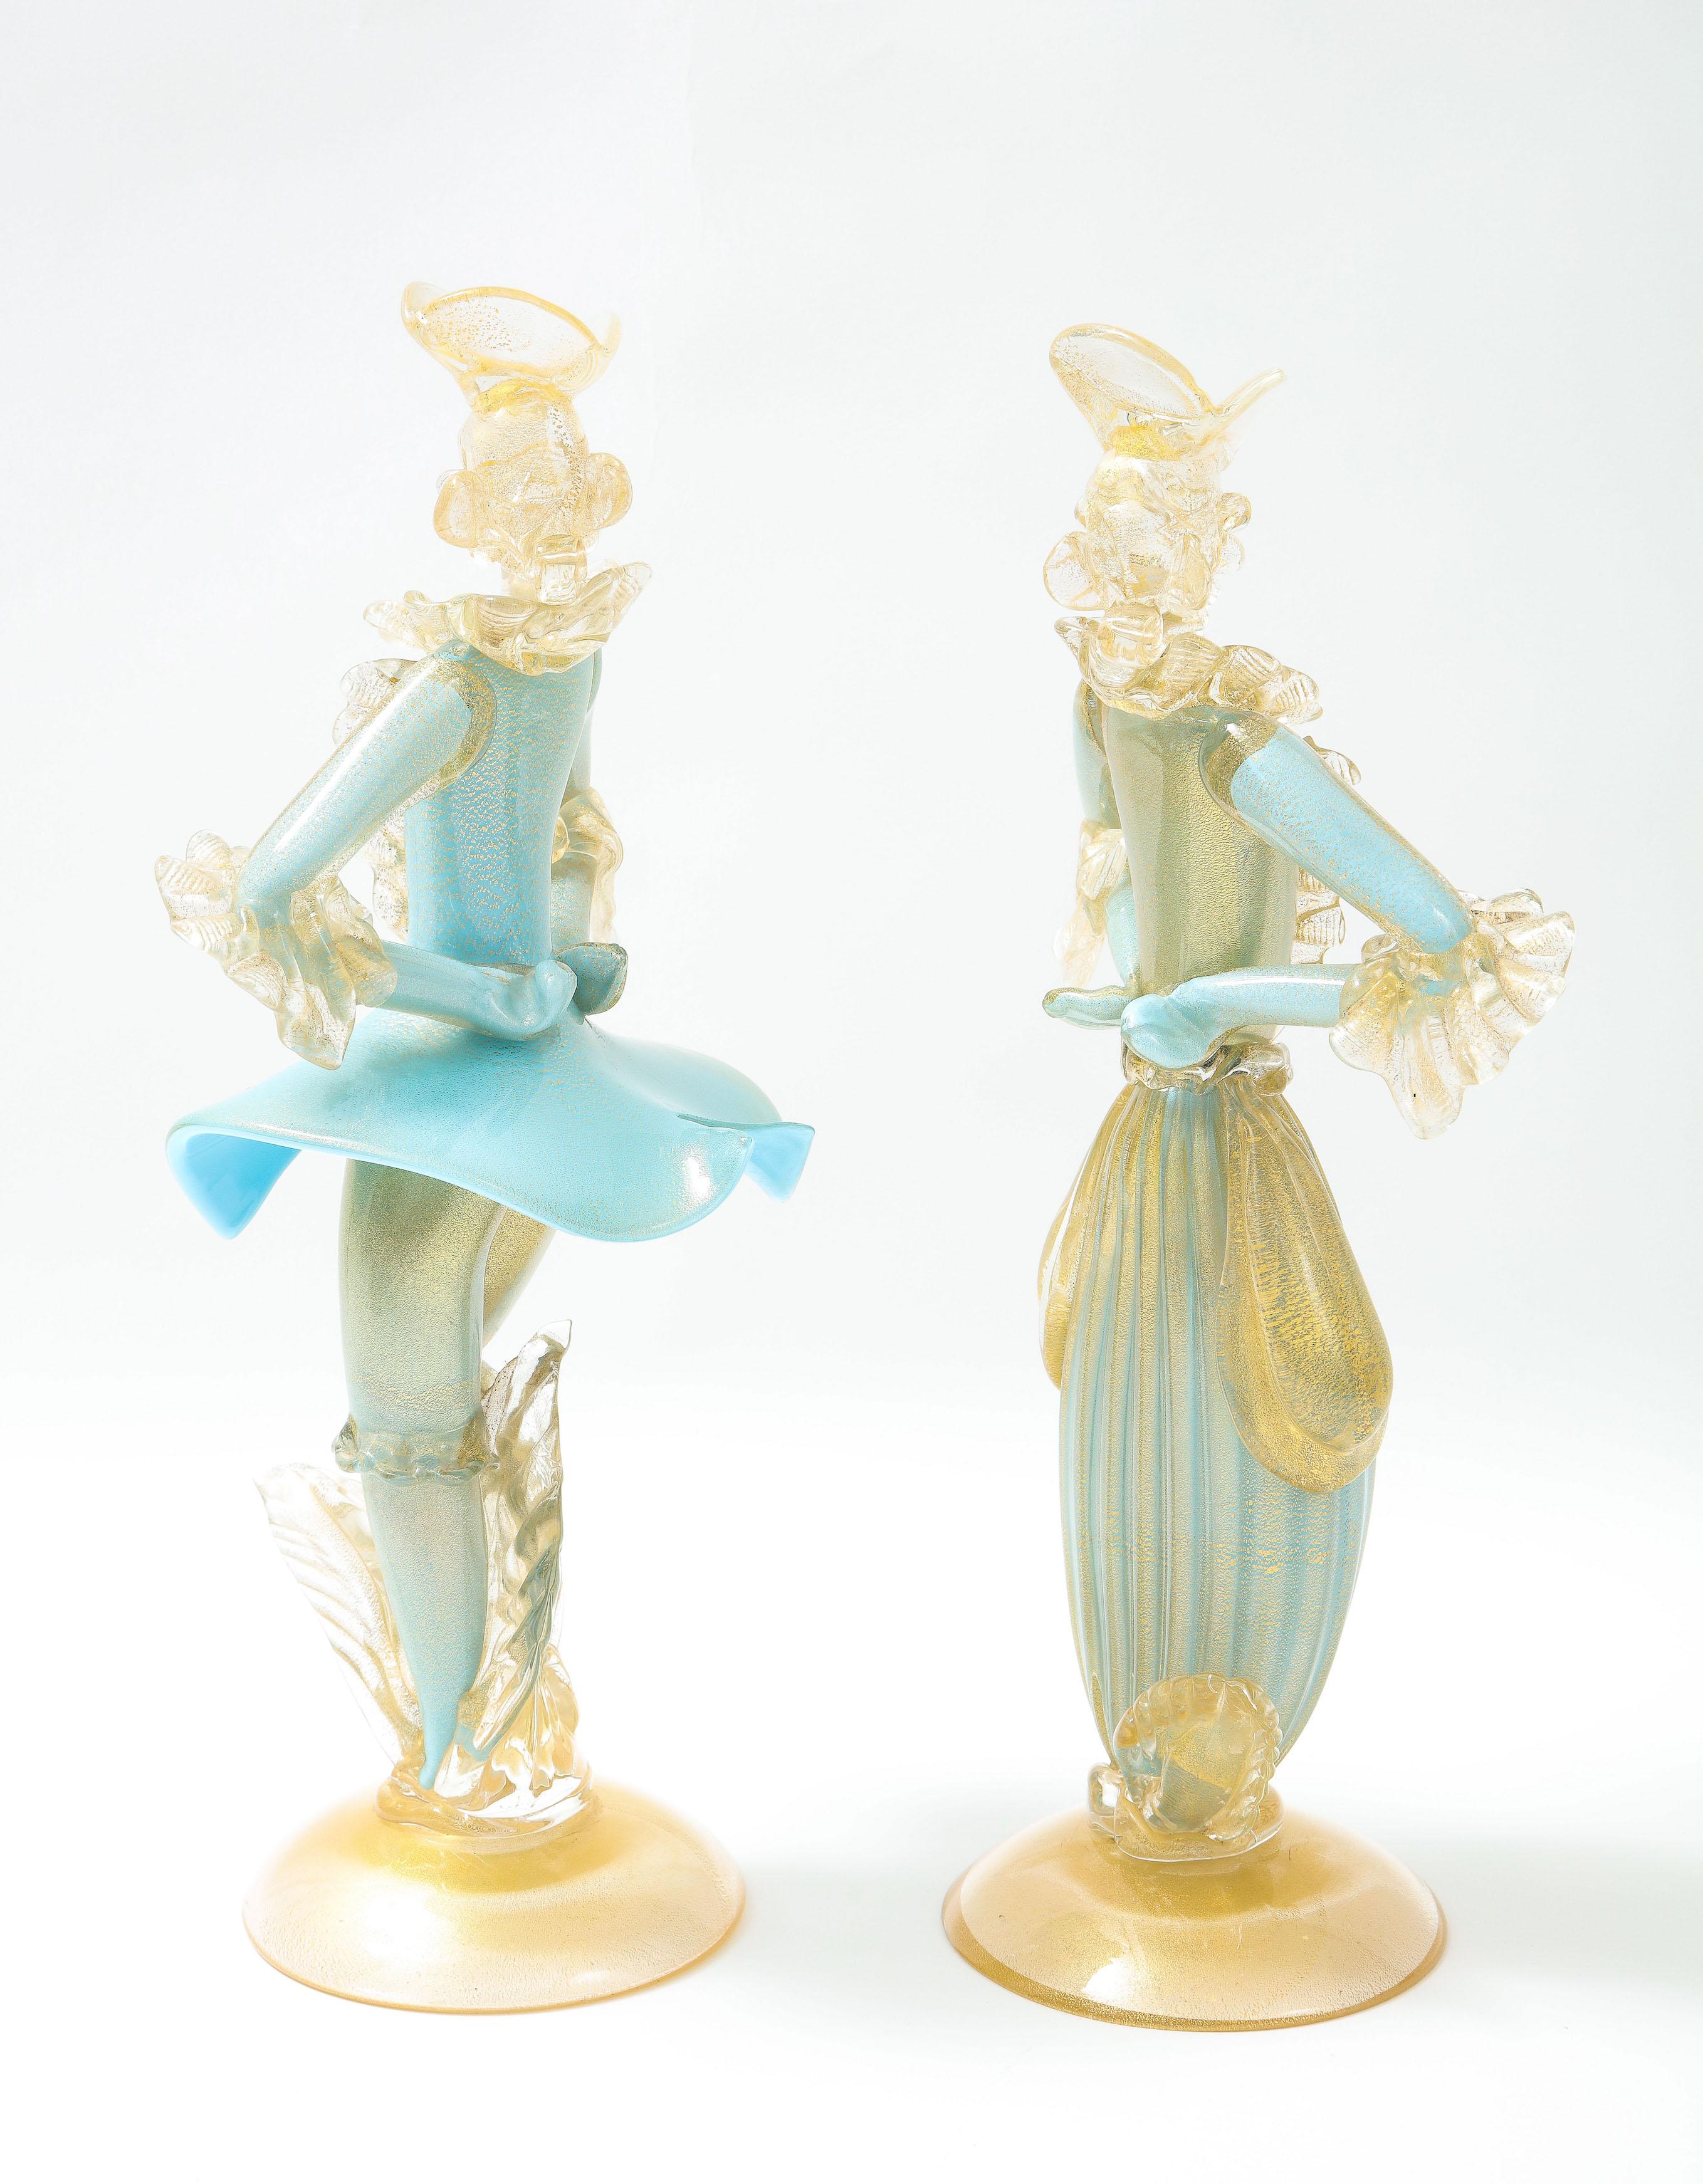 Italian Pair of Turquoise Murano Glass Louis XV Style Figurines by Seguso Vetri Arte For Sale